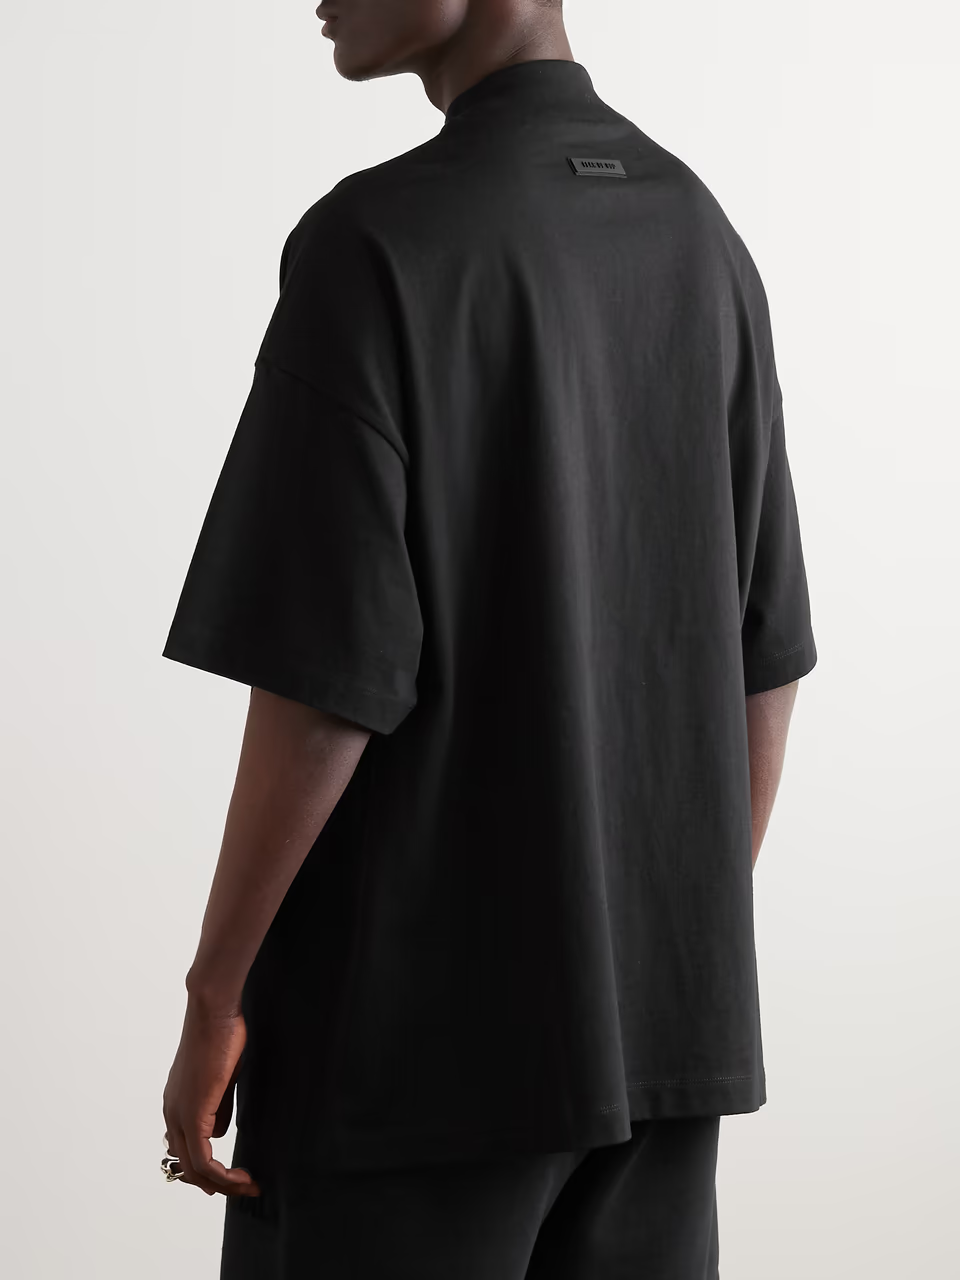 [NEW] FOG Fear Of God ESSENTIALS TEE BLACK SS23 T-Shirt Tee (Black Collection)